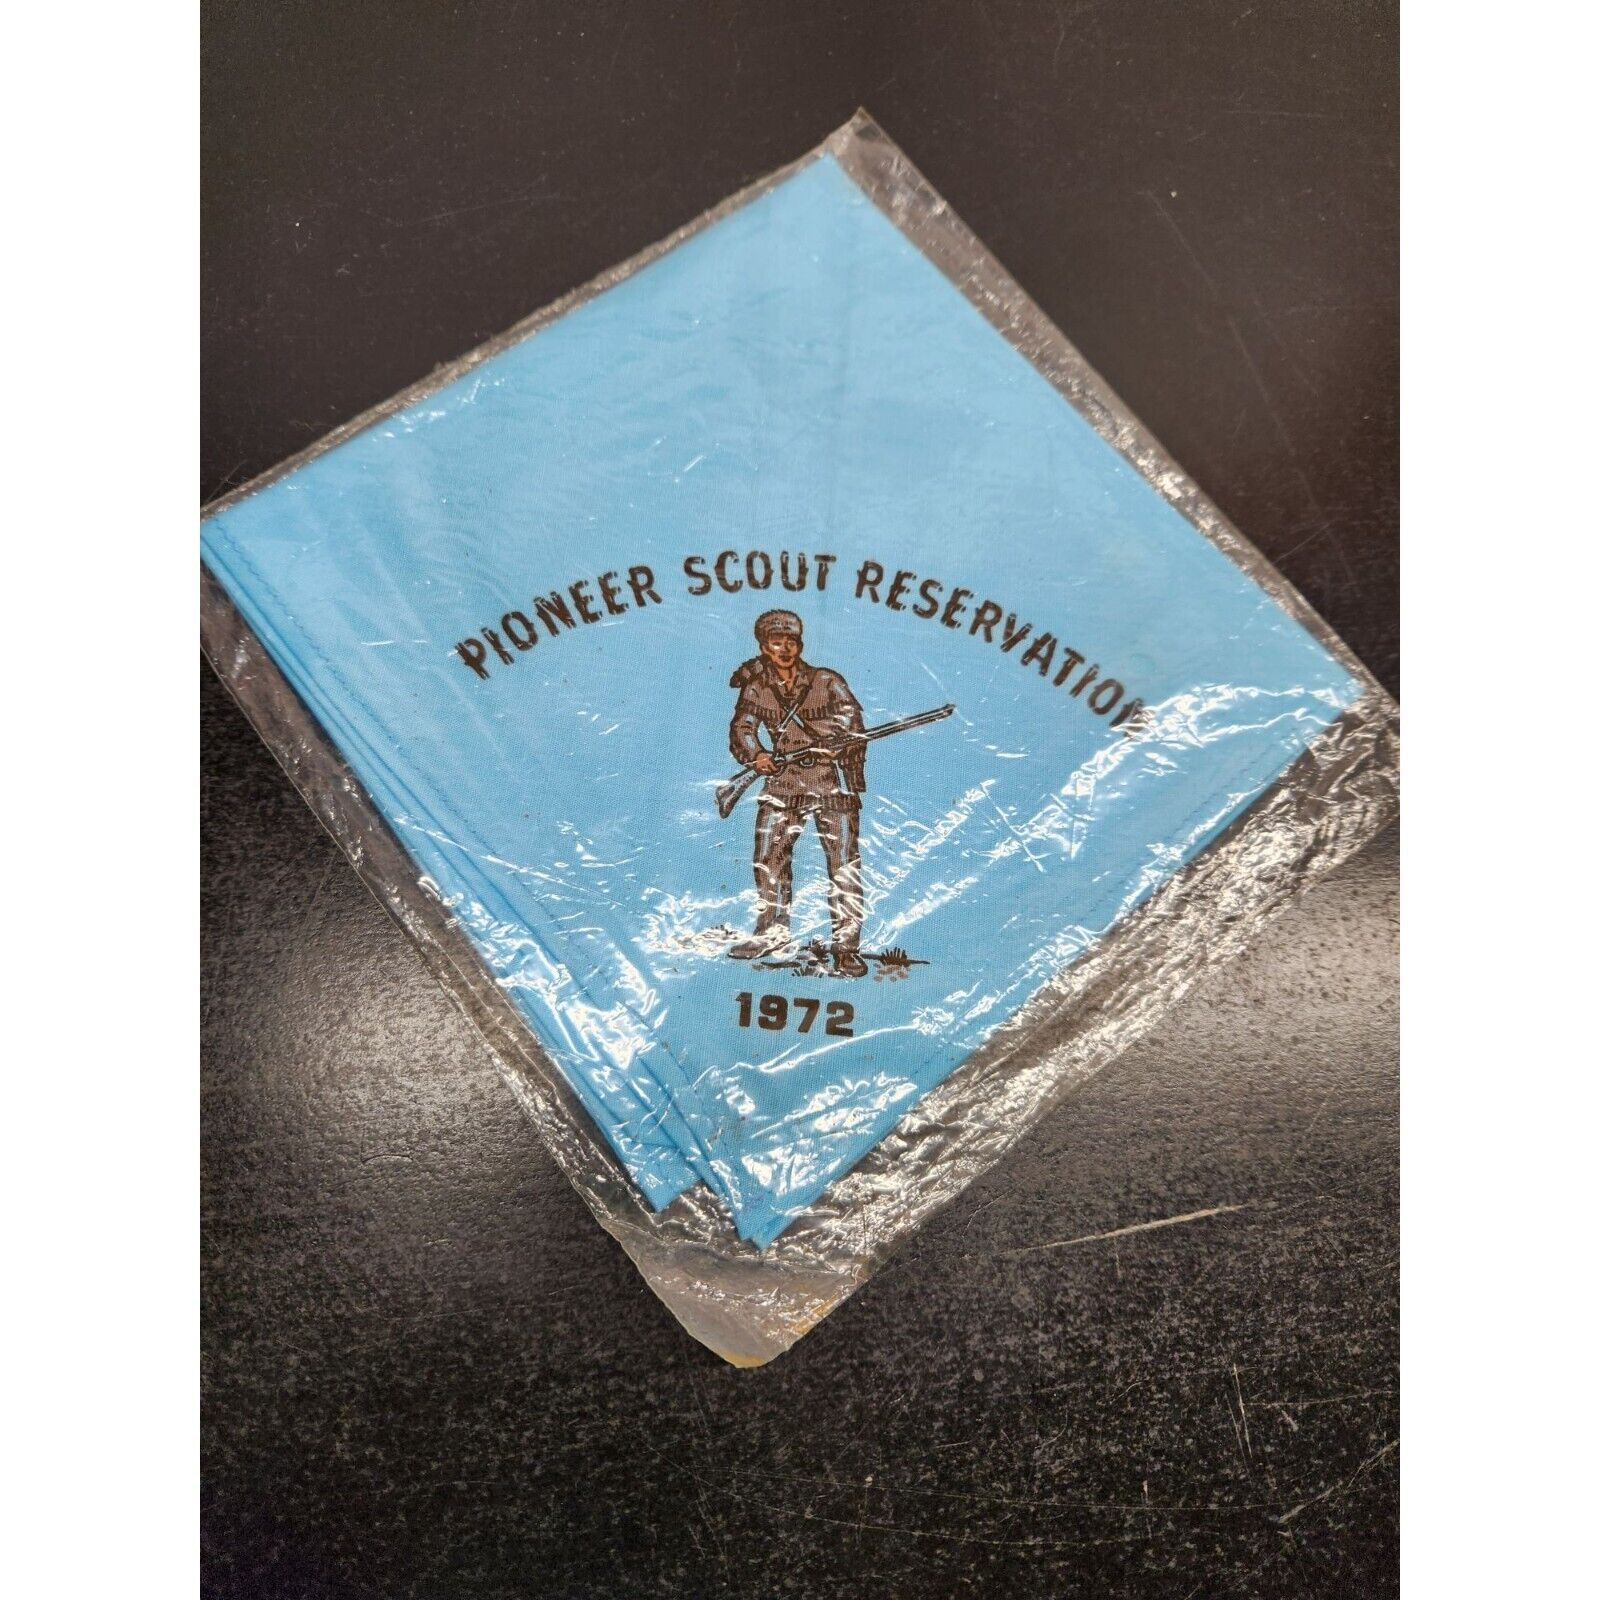 1972 Pioneer Scout Reservation Neckerchief - New - BSA - Boy Scouts